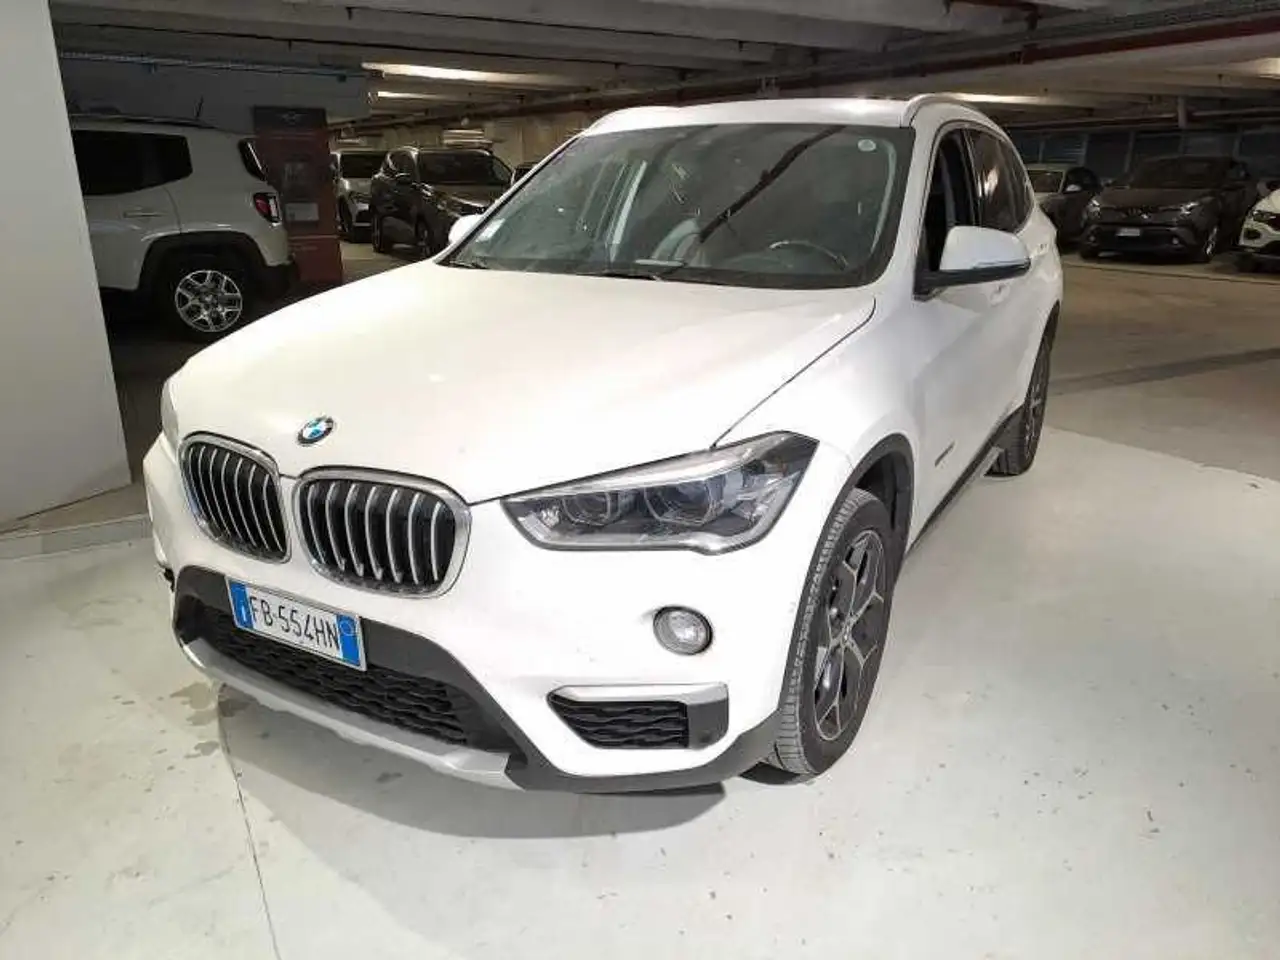 BMW X1 SUV/4x4/Pick-up in Wit tweedehands in Settimo Torinese - Torino - To voor € 12.850,-